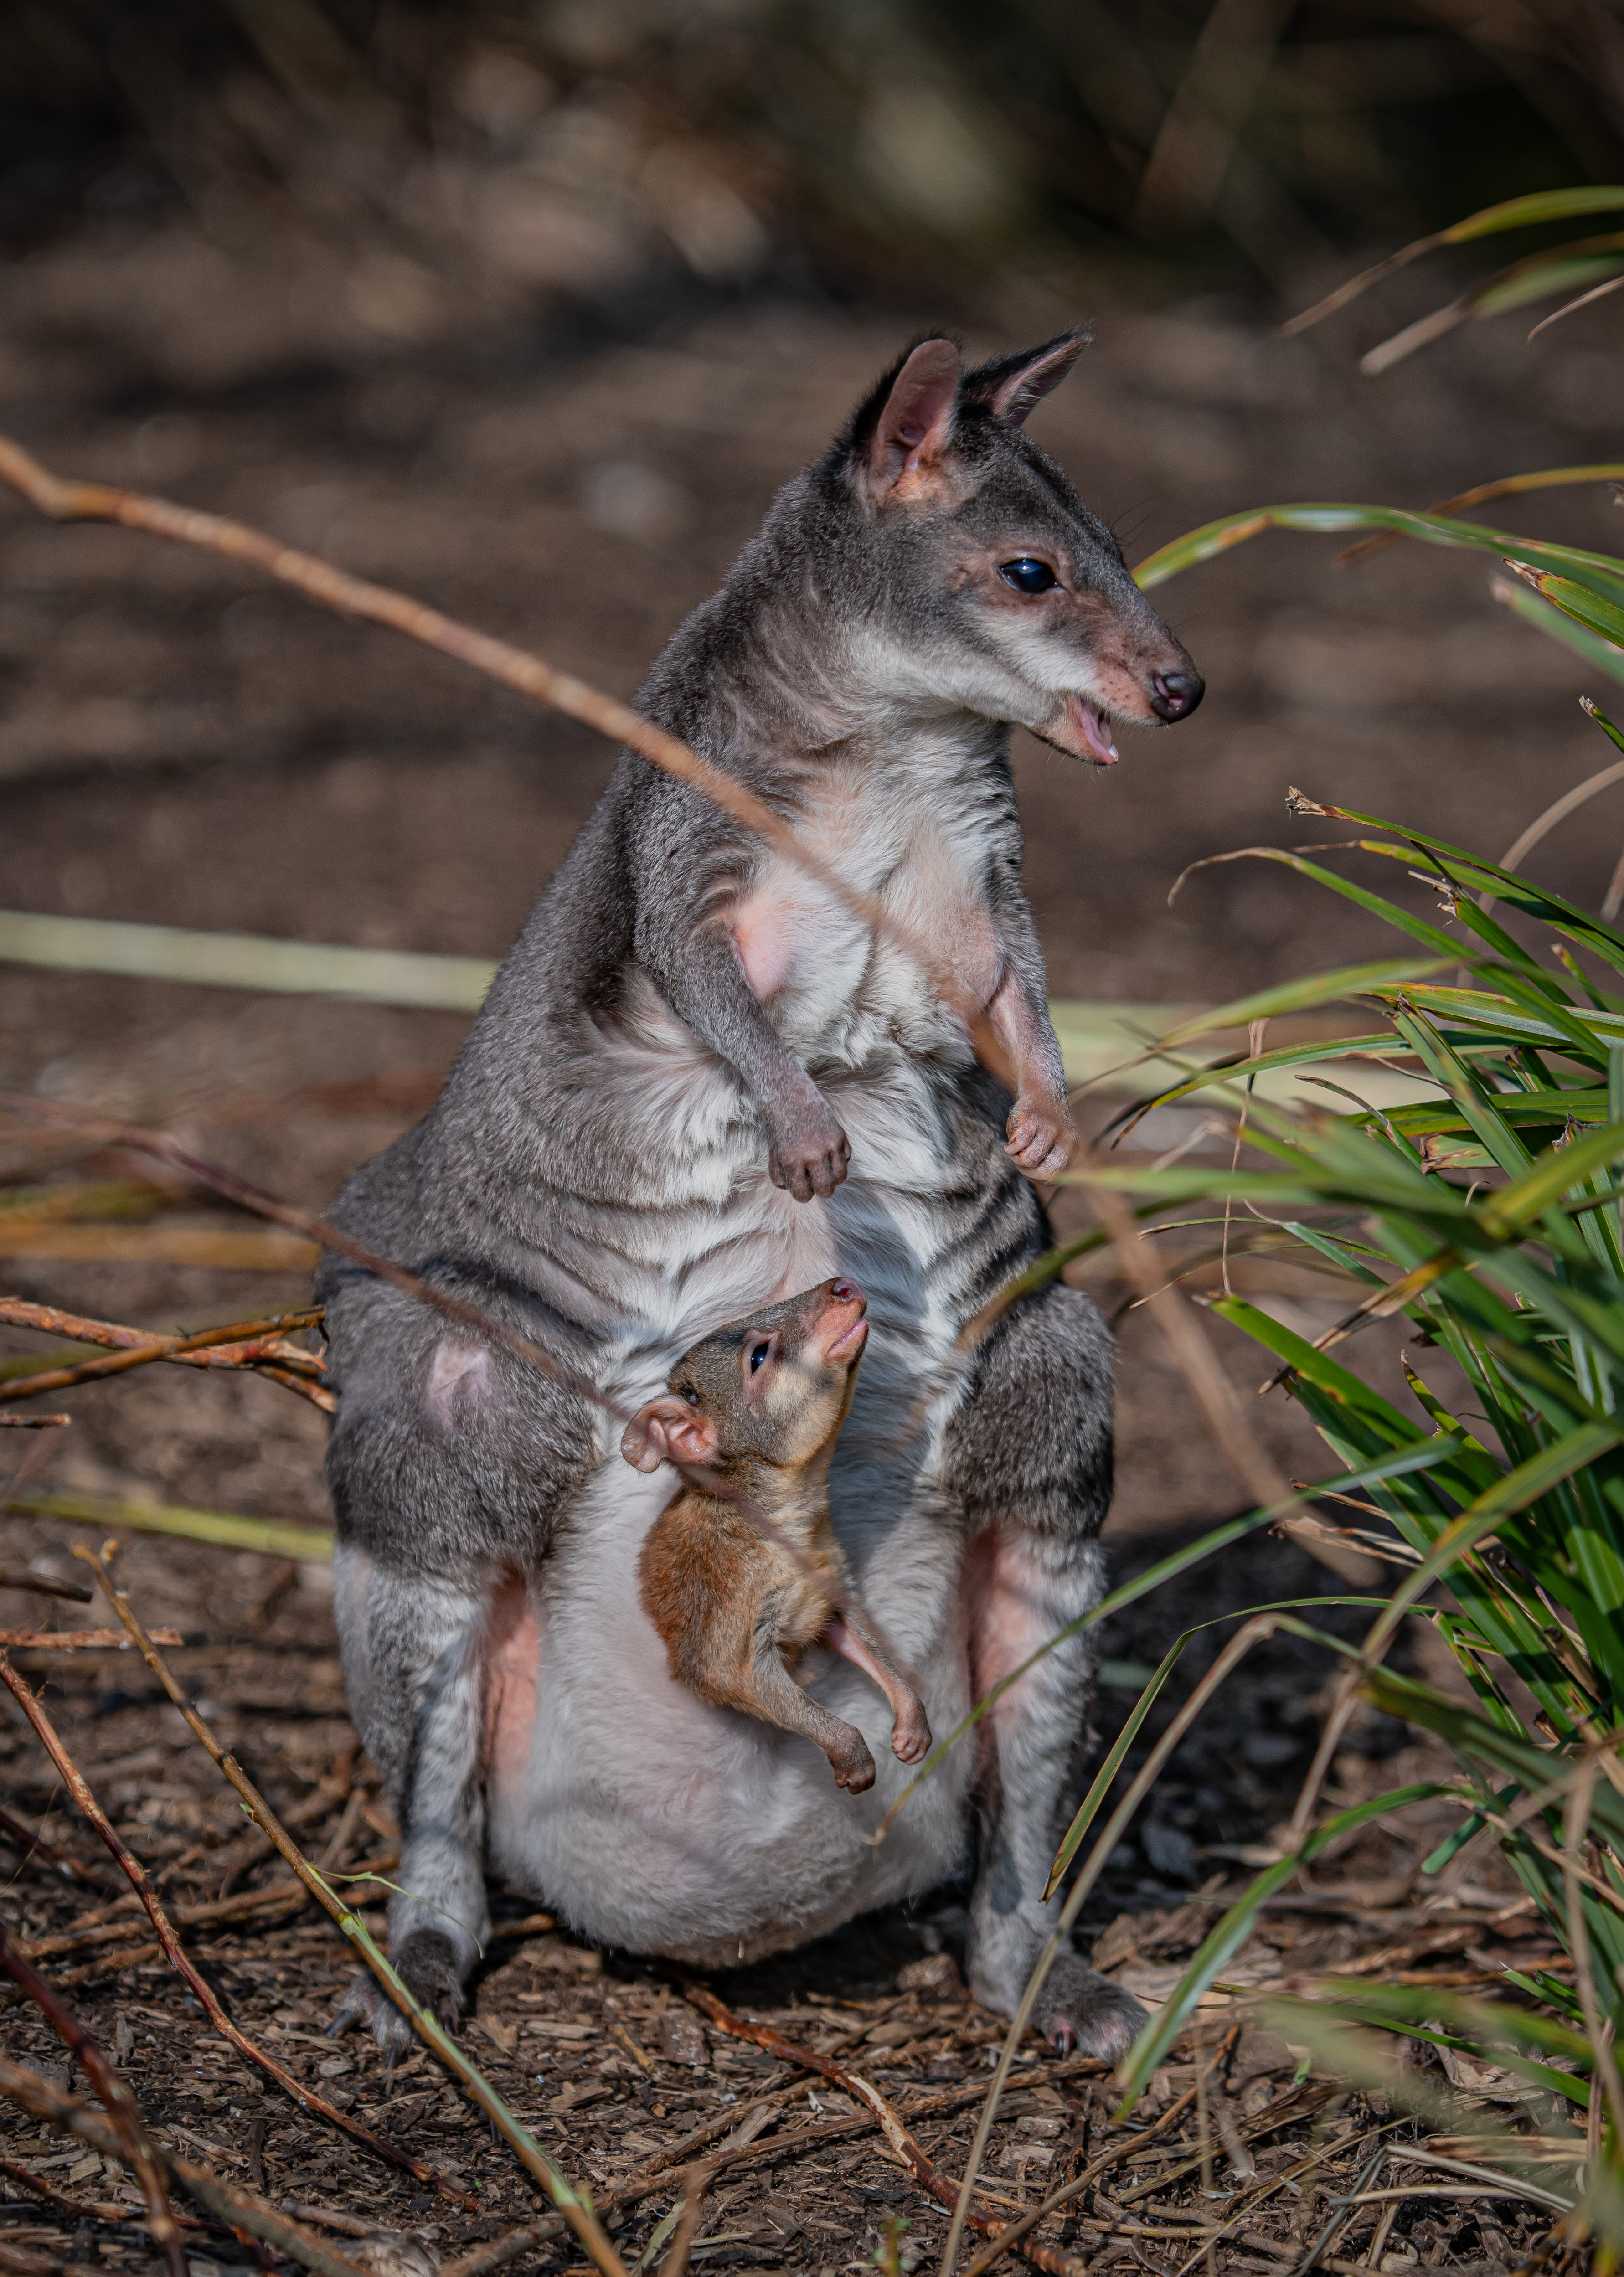 A newborn dusky pademelon joey peeks out of mum's pouch for the first time at Chester Zoo (16)